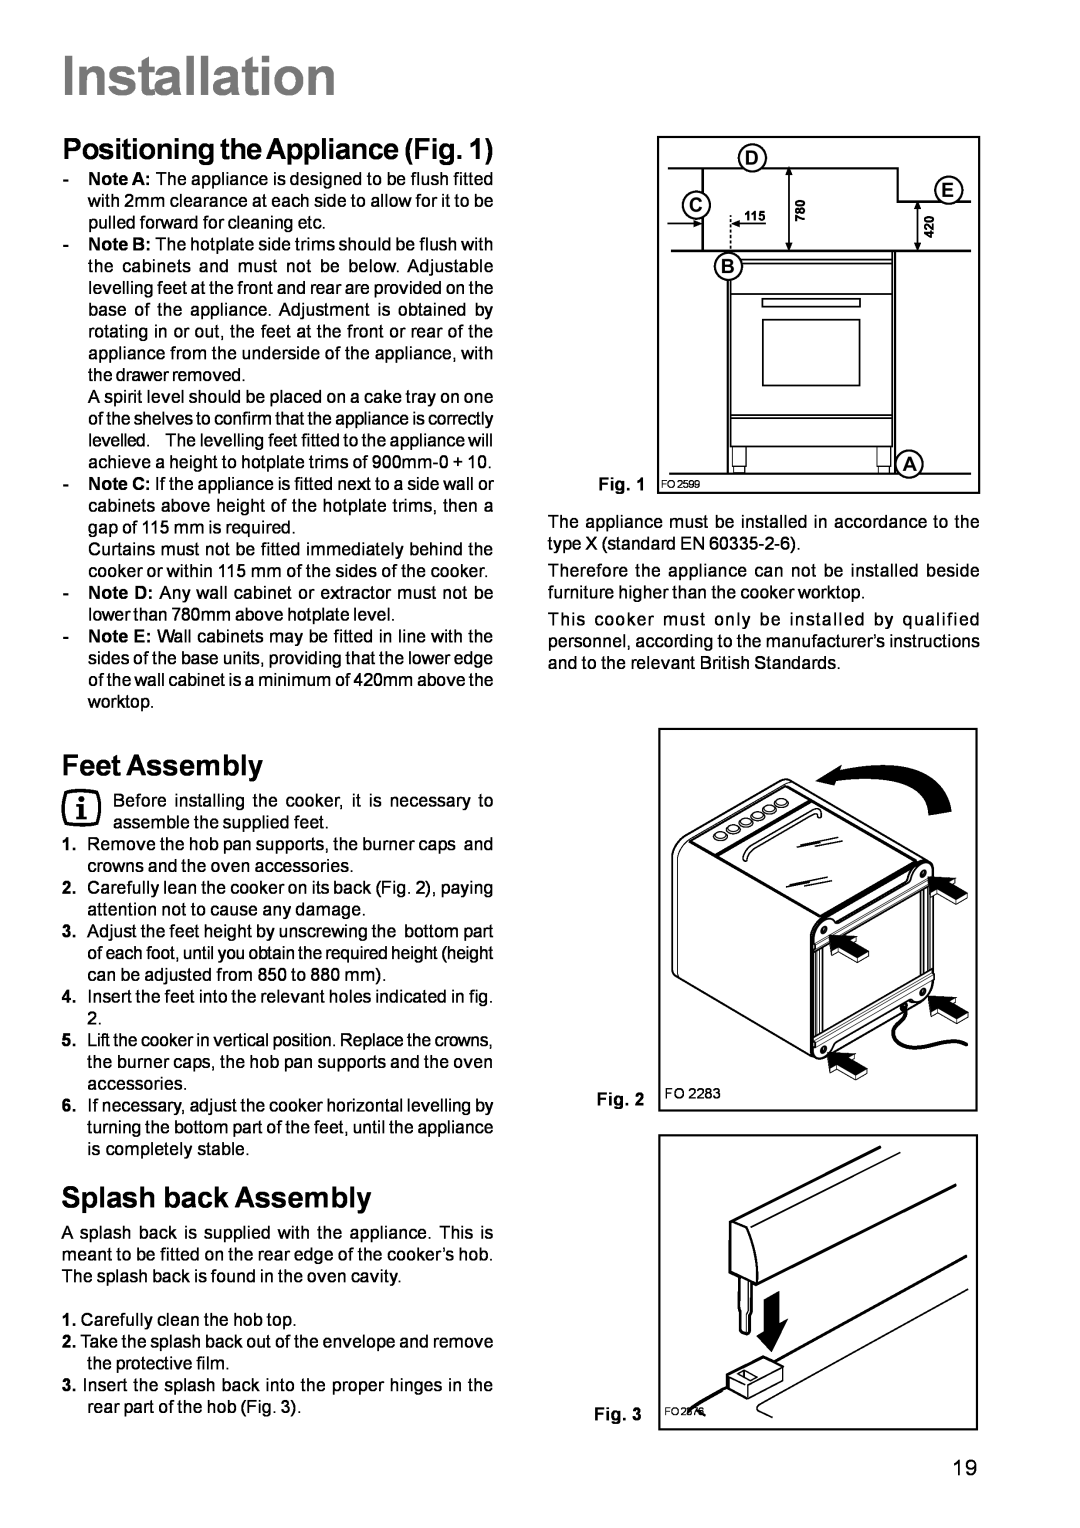 Electrolux CSIG 509 manual Installation, Positioning the Appliance Fig, Feet Assembly, Splash back Assembly 